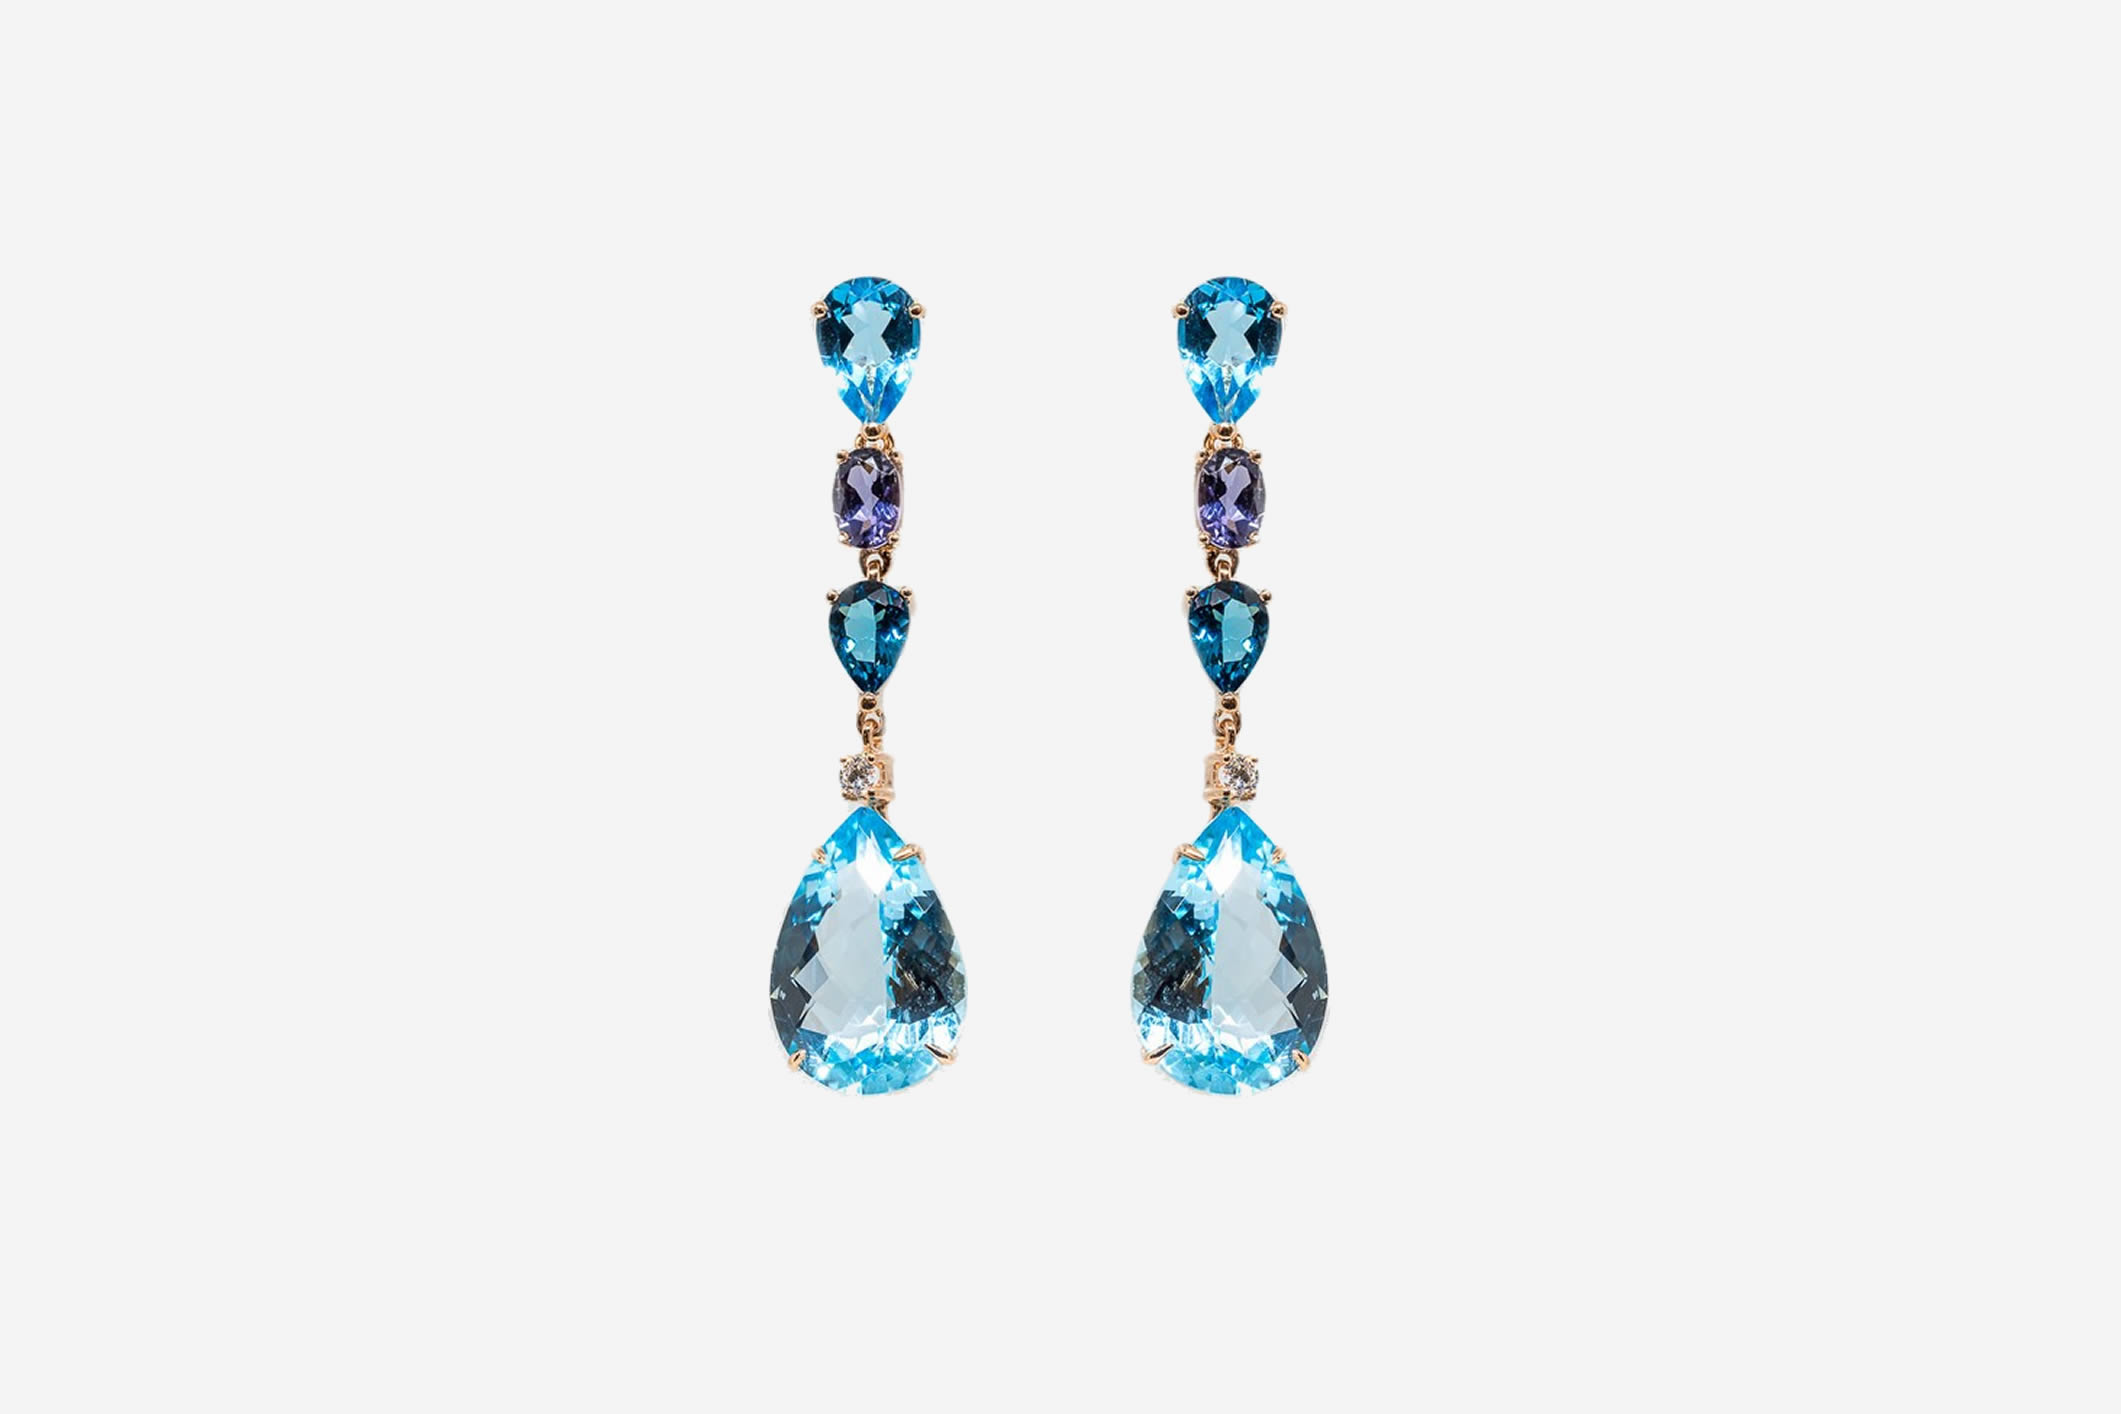 Setenta y Nueve rose gold earrings with London blue topaz, Swiss blue topaz and lilac iolites